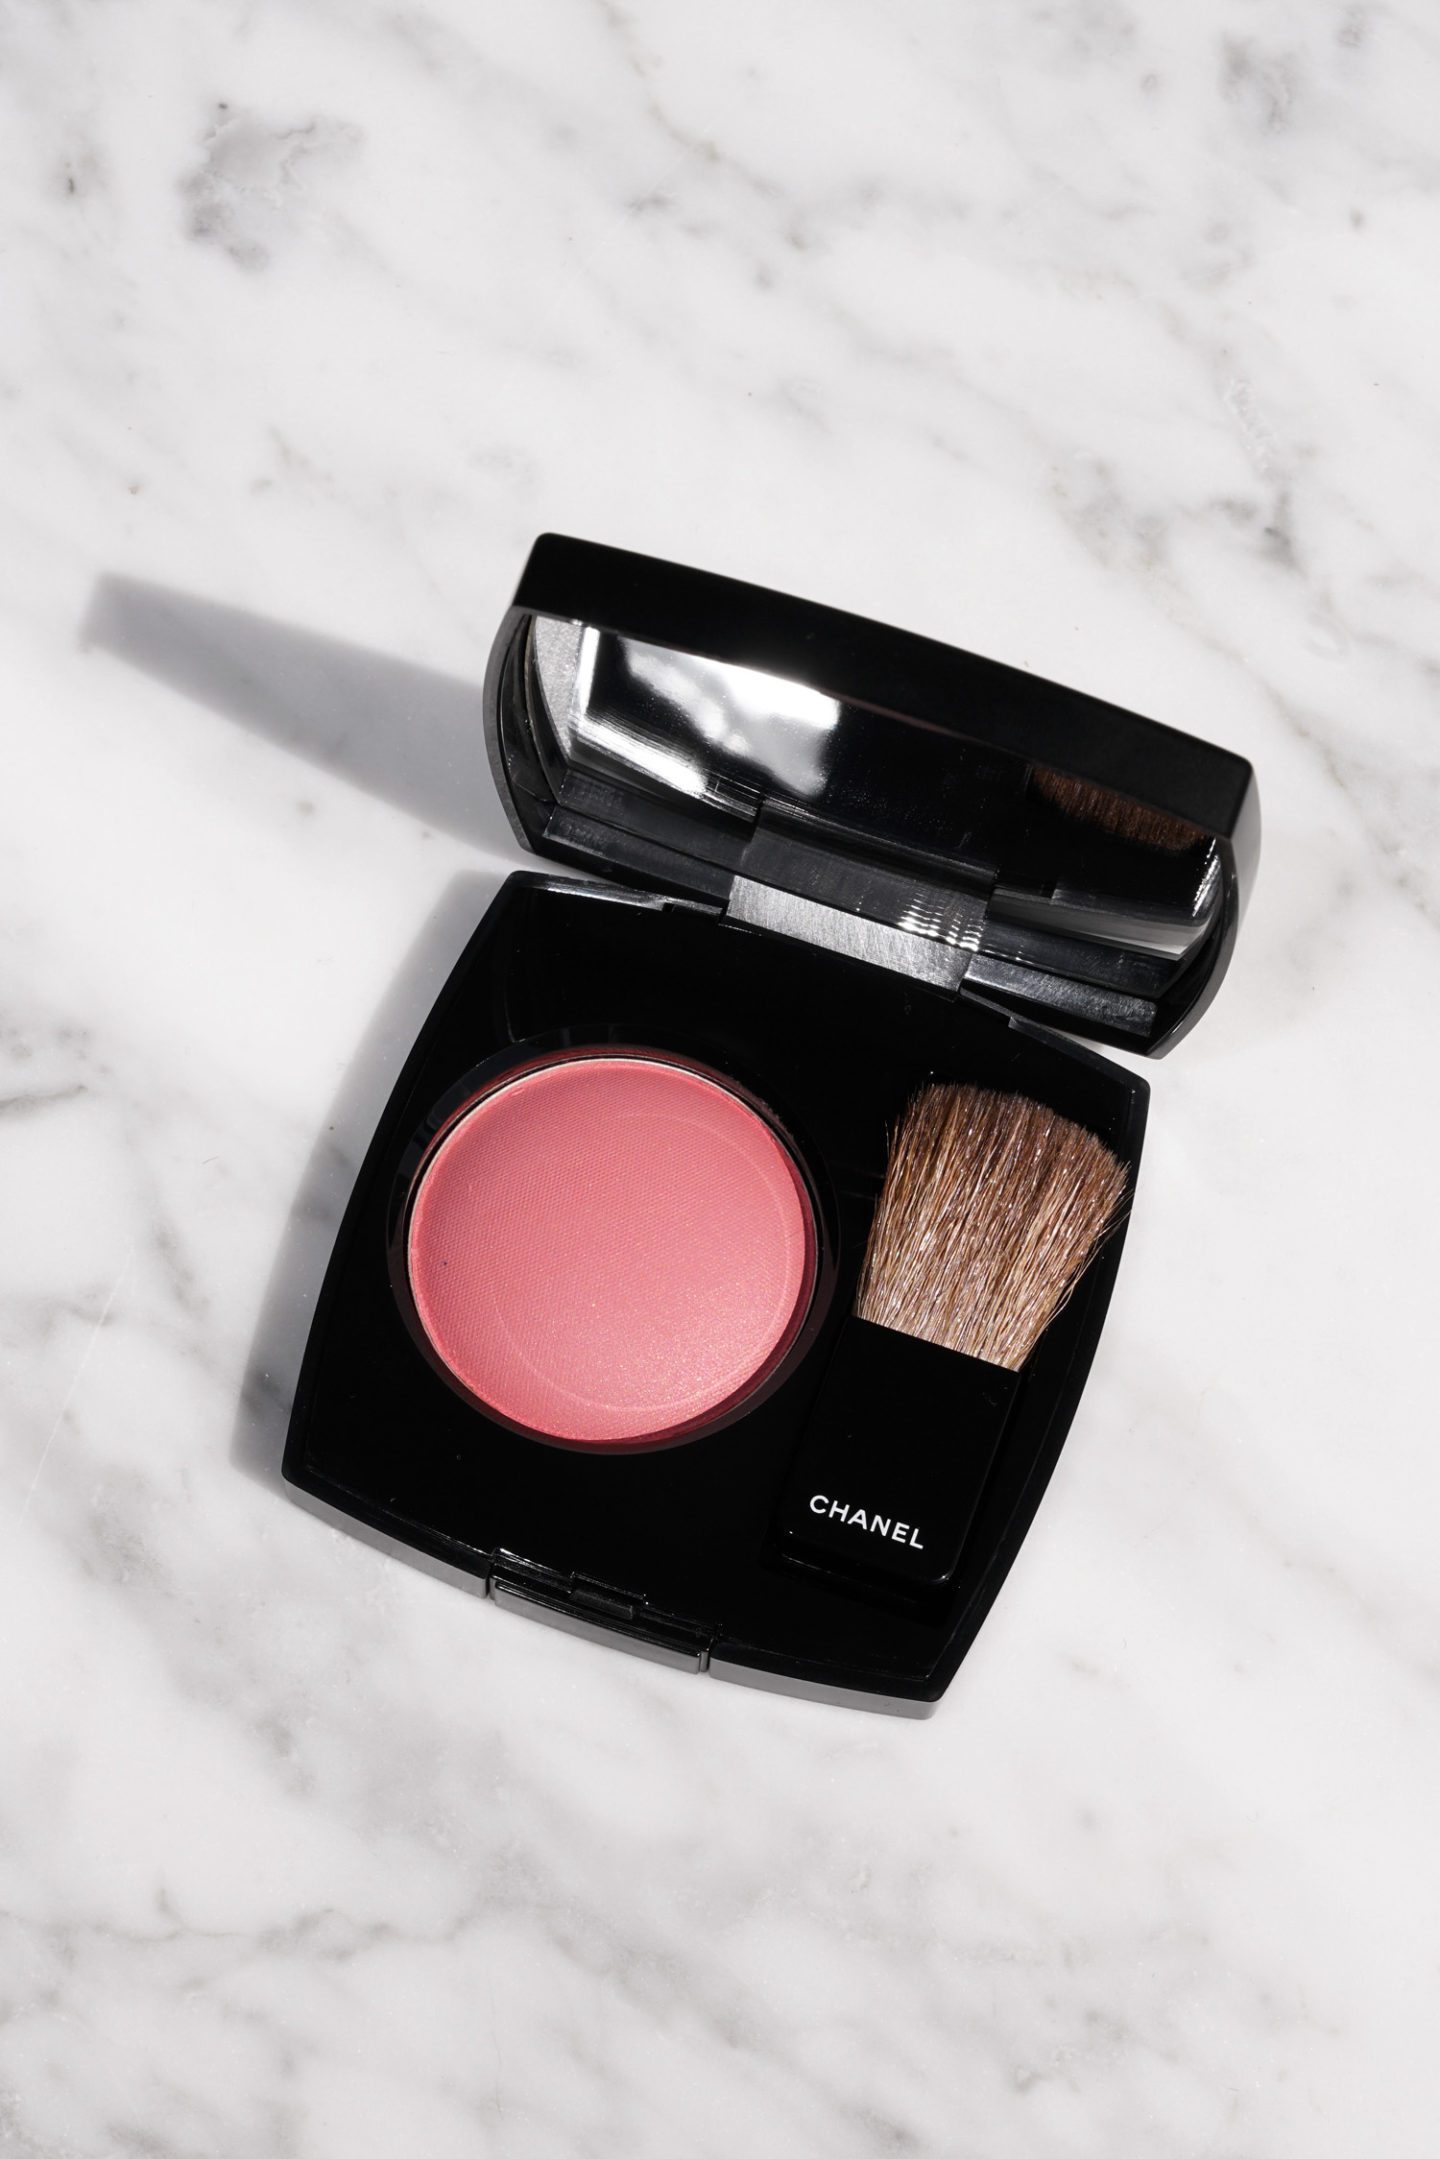 Chanel Powder Blush Quintessence Review | The Beauty Look Book